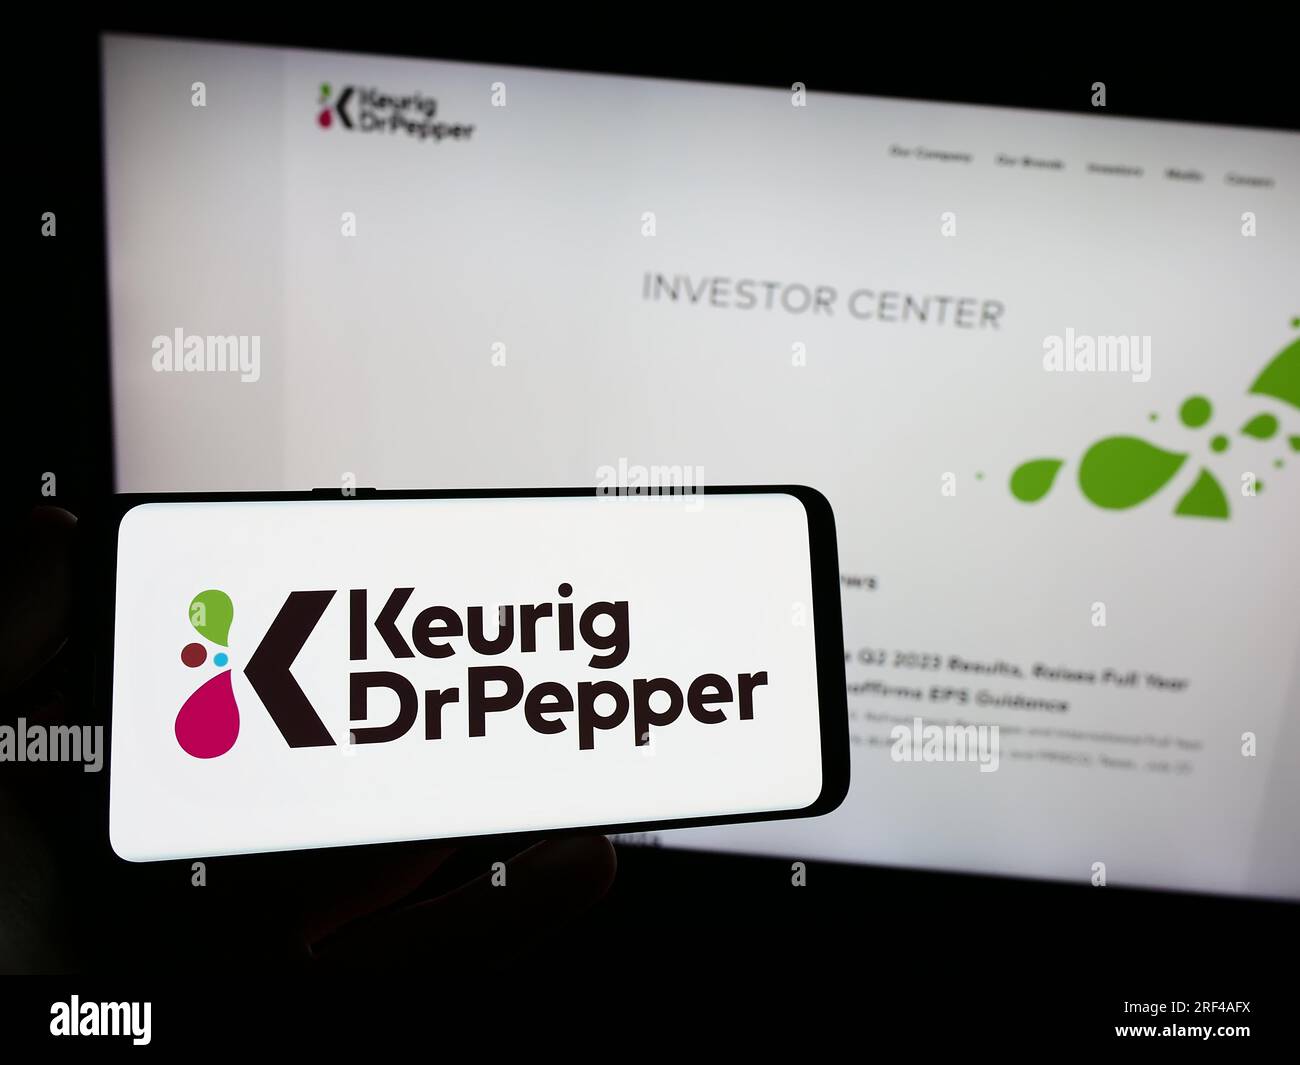 Person holding smartphone with logo of US beverage company Keurig Dr Pepper Inc. on screen in front of website. Focus on phone display. Stock Photo